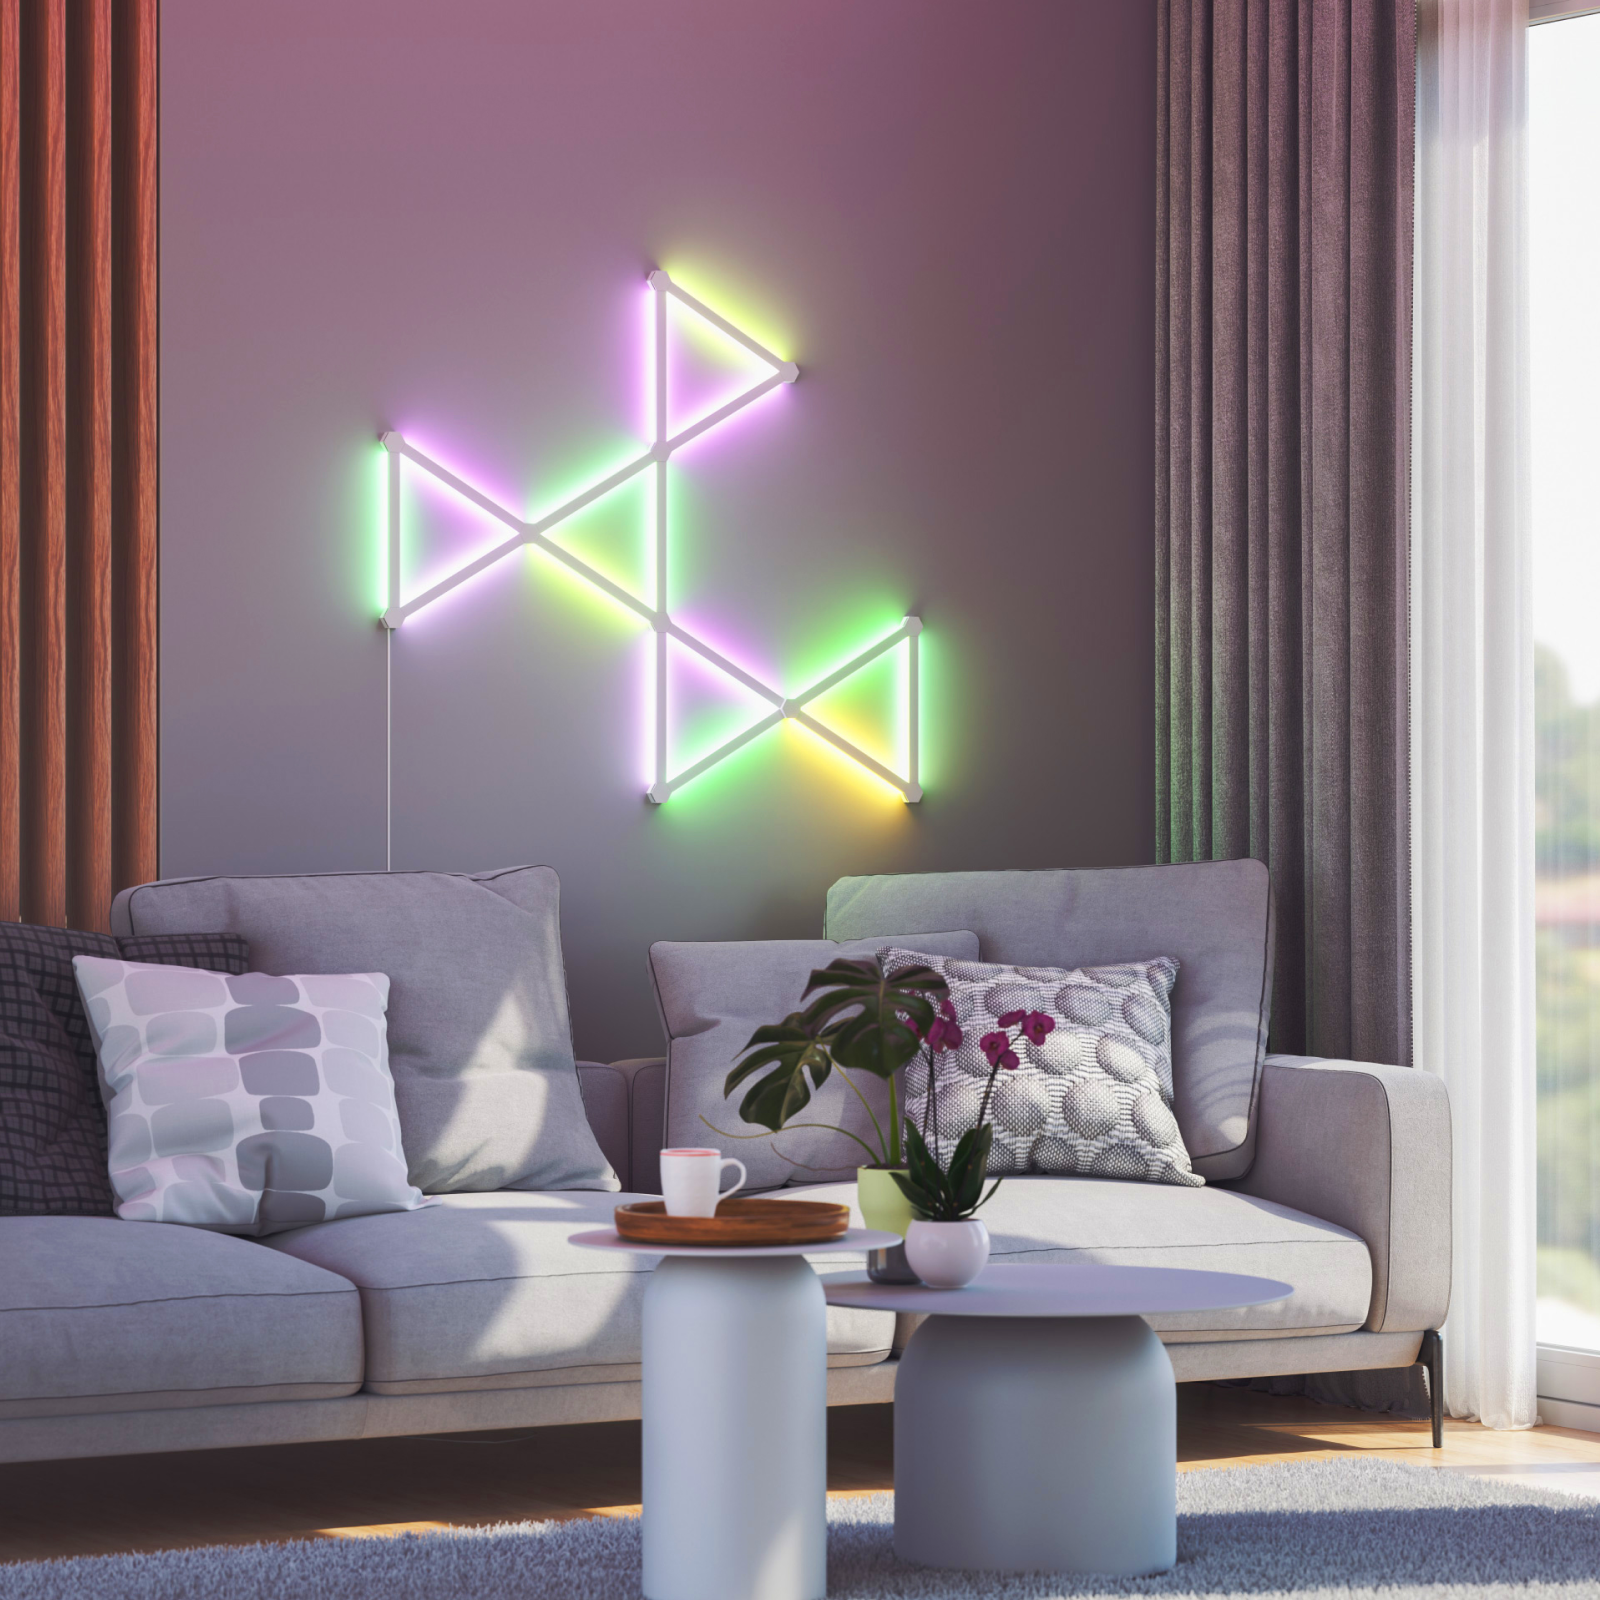 Nanoleaf Lines Thread enabled color changing smart modular backlit light lines mounted to a wall in a home office. Nanoleaf App. HomeKit, Google Assistant, Amazon Alexa, IFTTT.